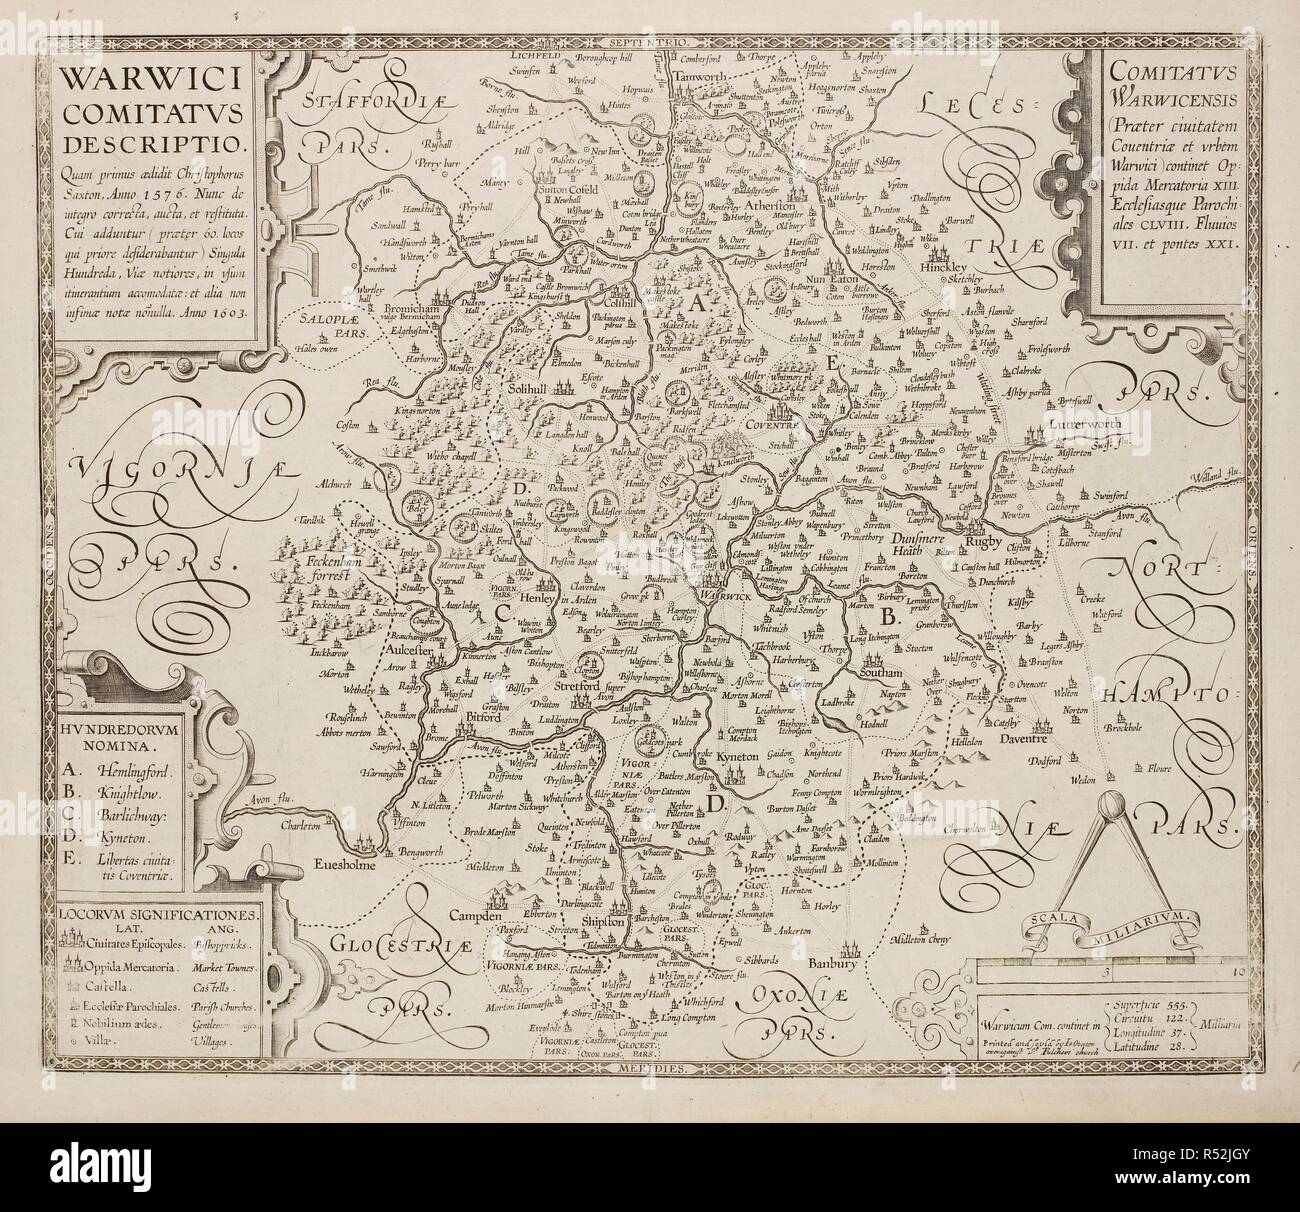 Map of Warwici Comitatvs, or Warwickshire, and Warwick. . A collection of 37 Maps of the counties of England. London. H. Overton, 1714. A collection of 37 Maps of the counties of England, being reprints, of J. Speedâ€™s maps, by Henry Overton, together with those of P. Stent reprinted by John Overton, and maps of Derbyshire and Yorkshire engraved by S. Nicholls. Source: Maps.145.c.9 18. Language: Latin. Stock Photo